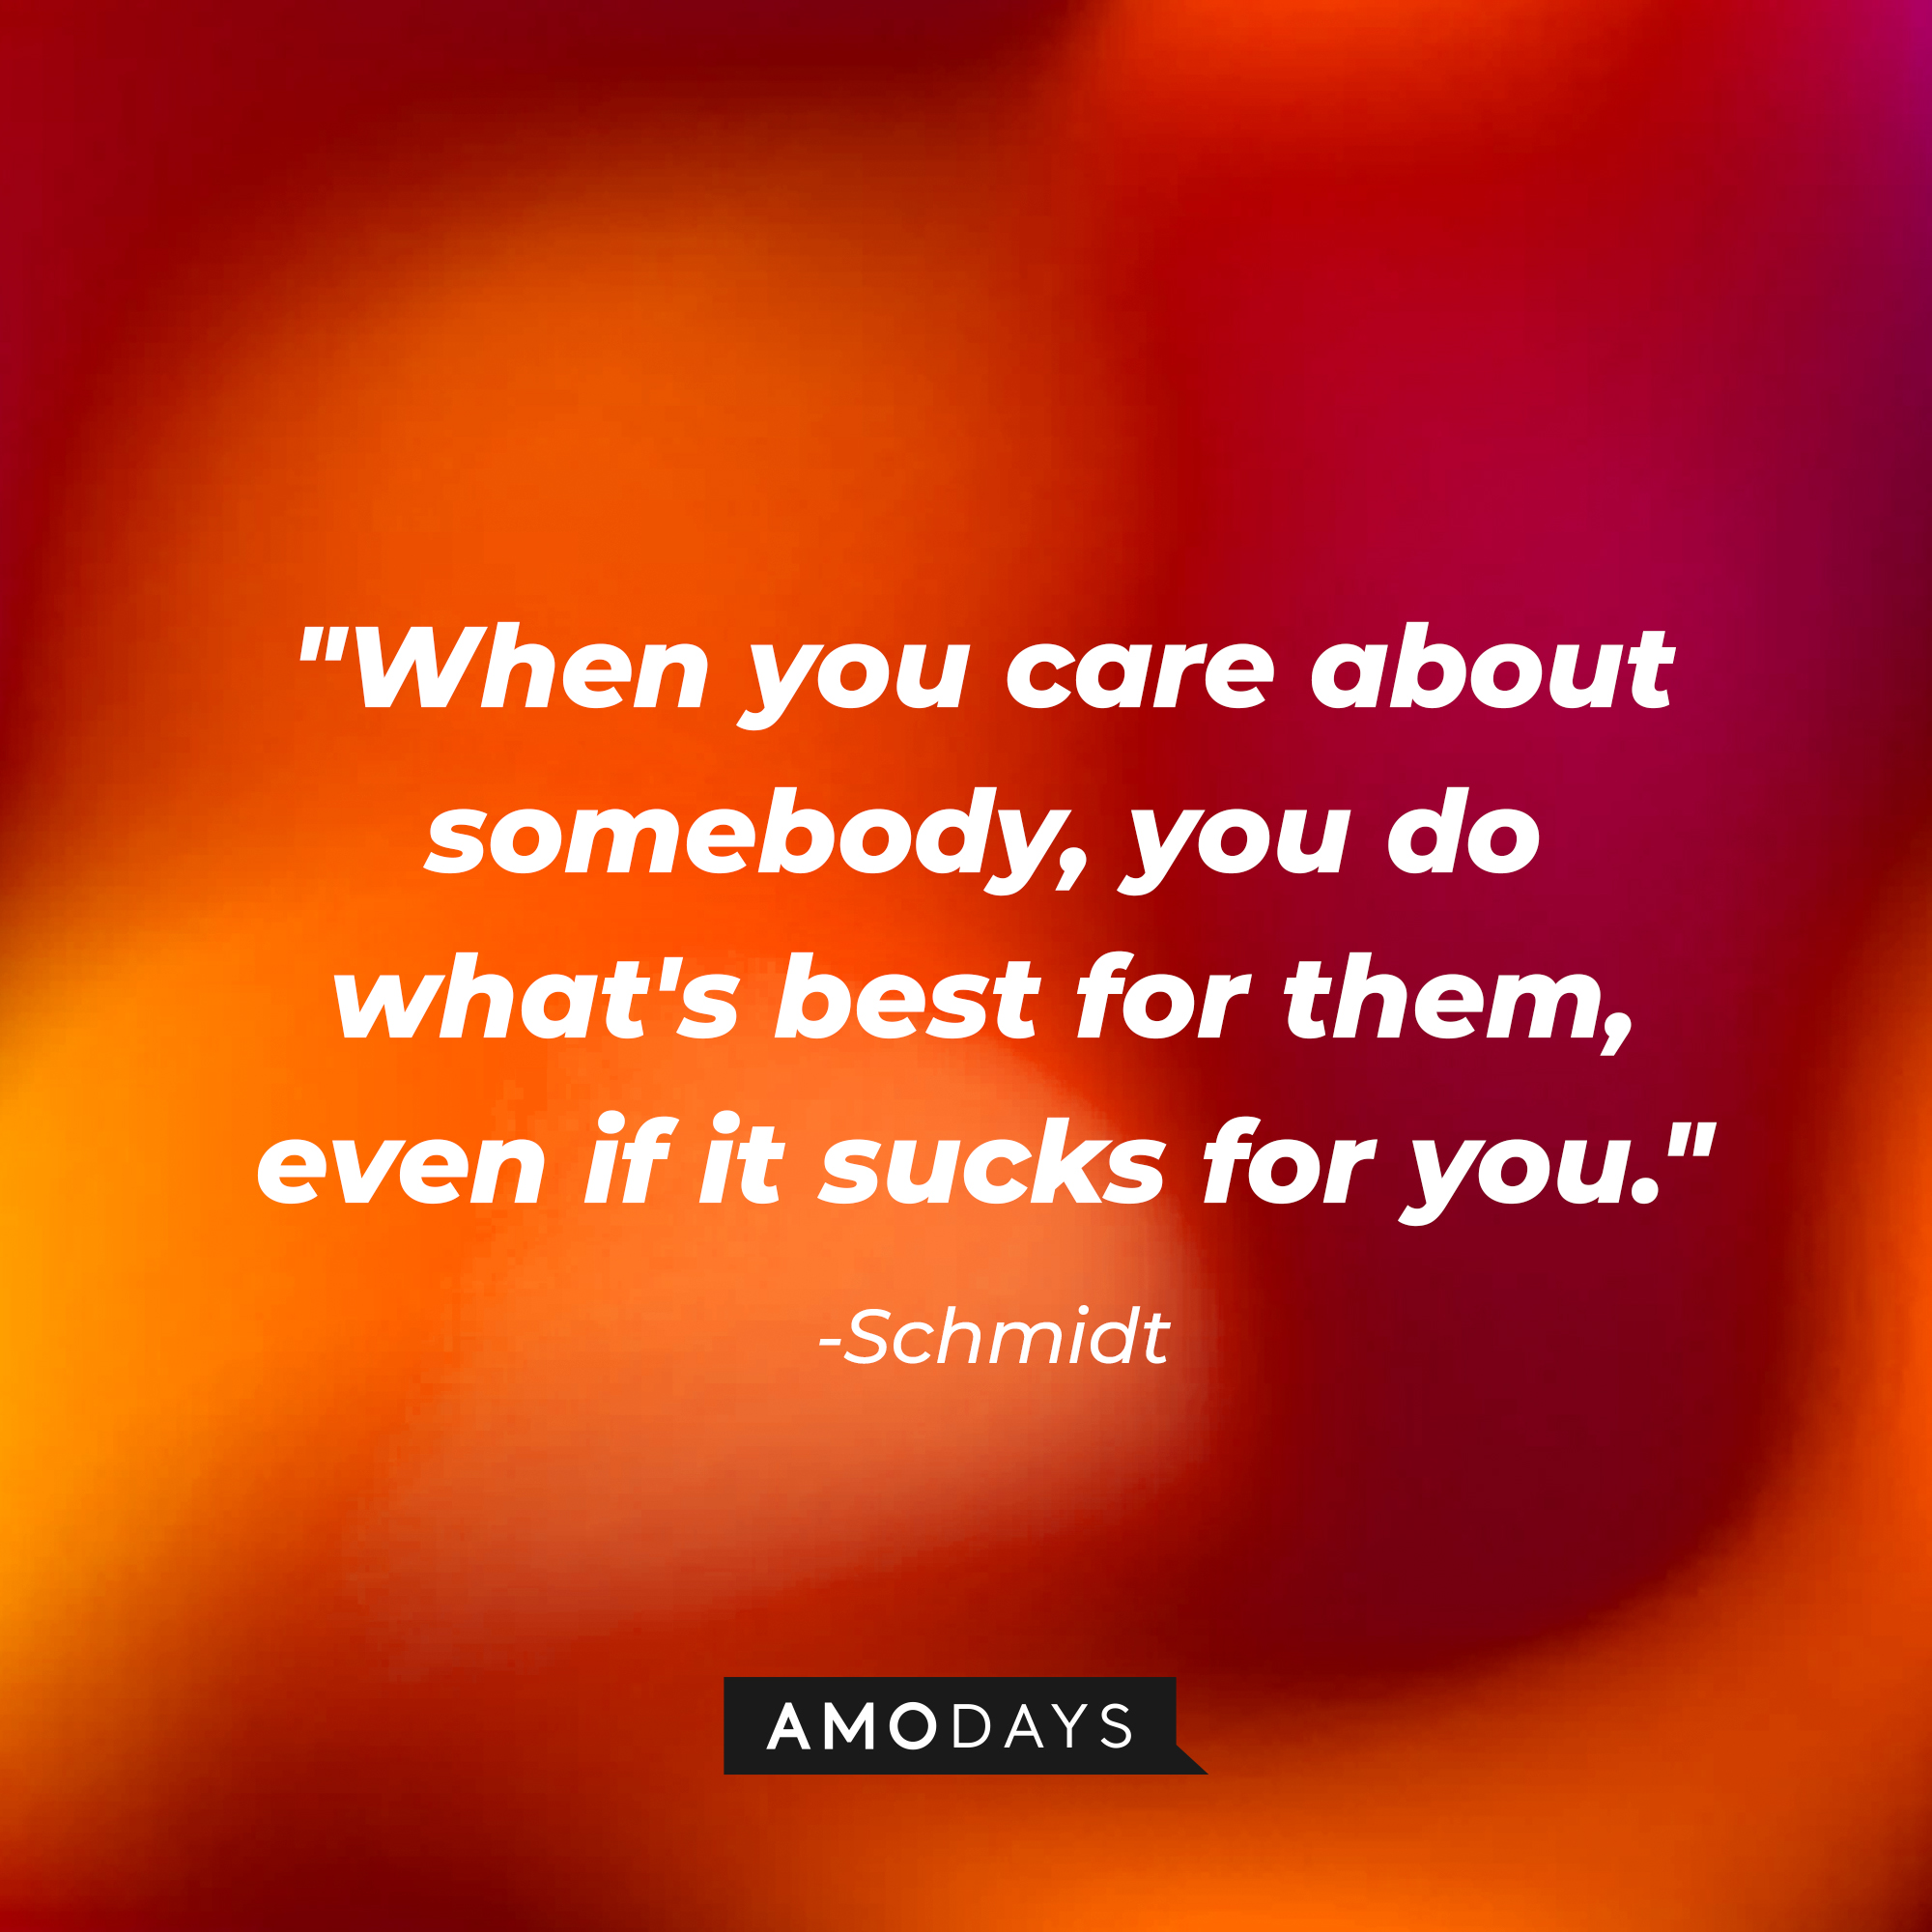 Schmidt's quote, "When you care about somebody, you do what's best for them, even if it sucks for you." | Source: Amodays